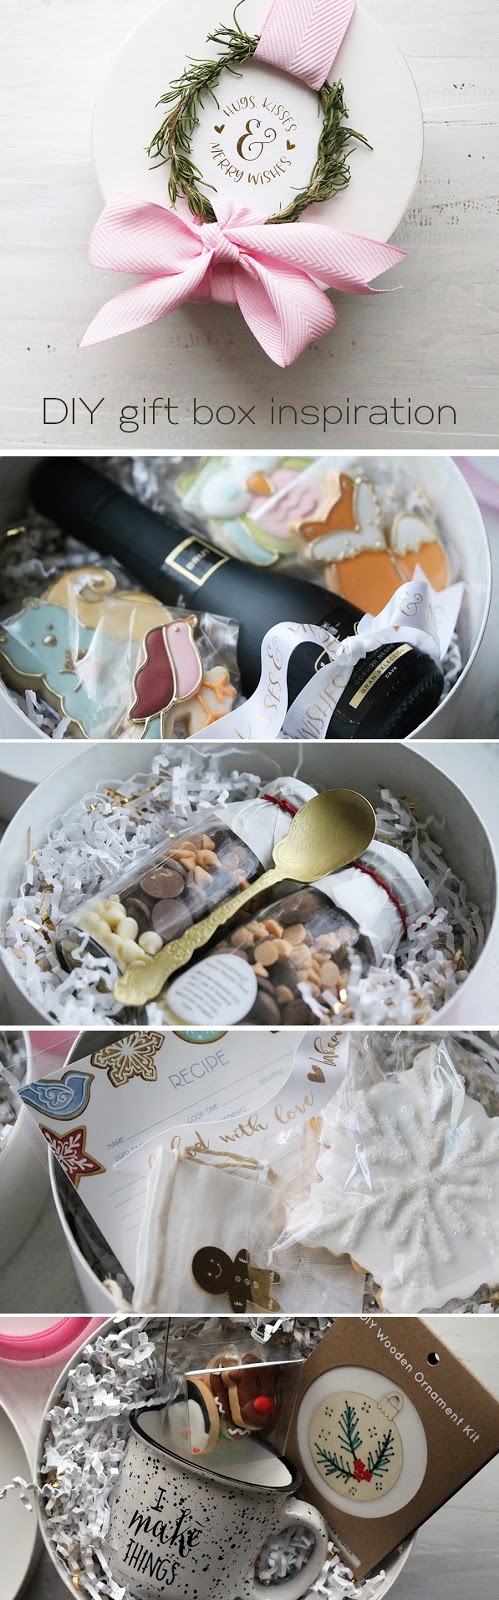 gift box packaging inspiration for holiday gift giving | creativebag.com